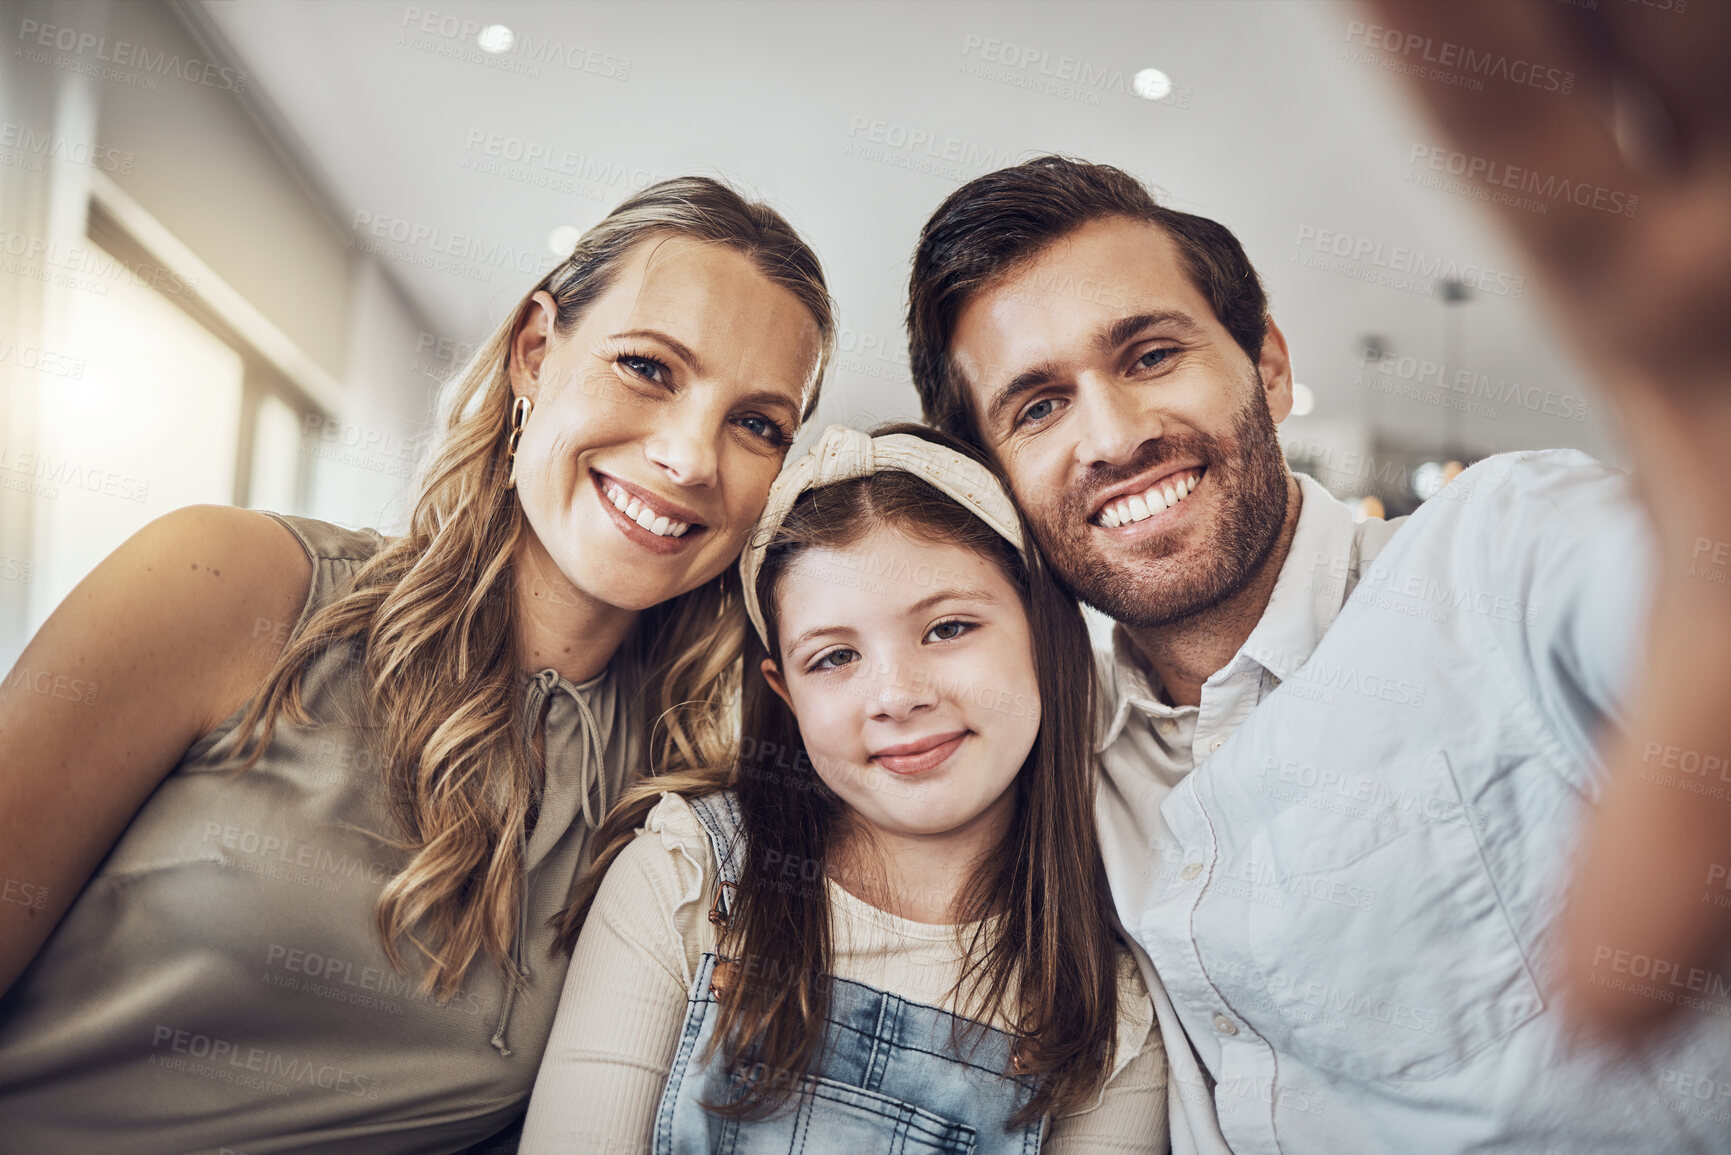 Buy stock photo Portrait, mother or father with a girl take a selfie as a happy family in living room bonding in Australia. Child, smile or parents relaxing with a smile enjoying quality time taking lovely pictures 